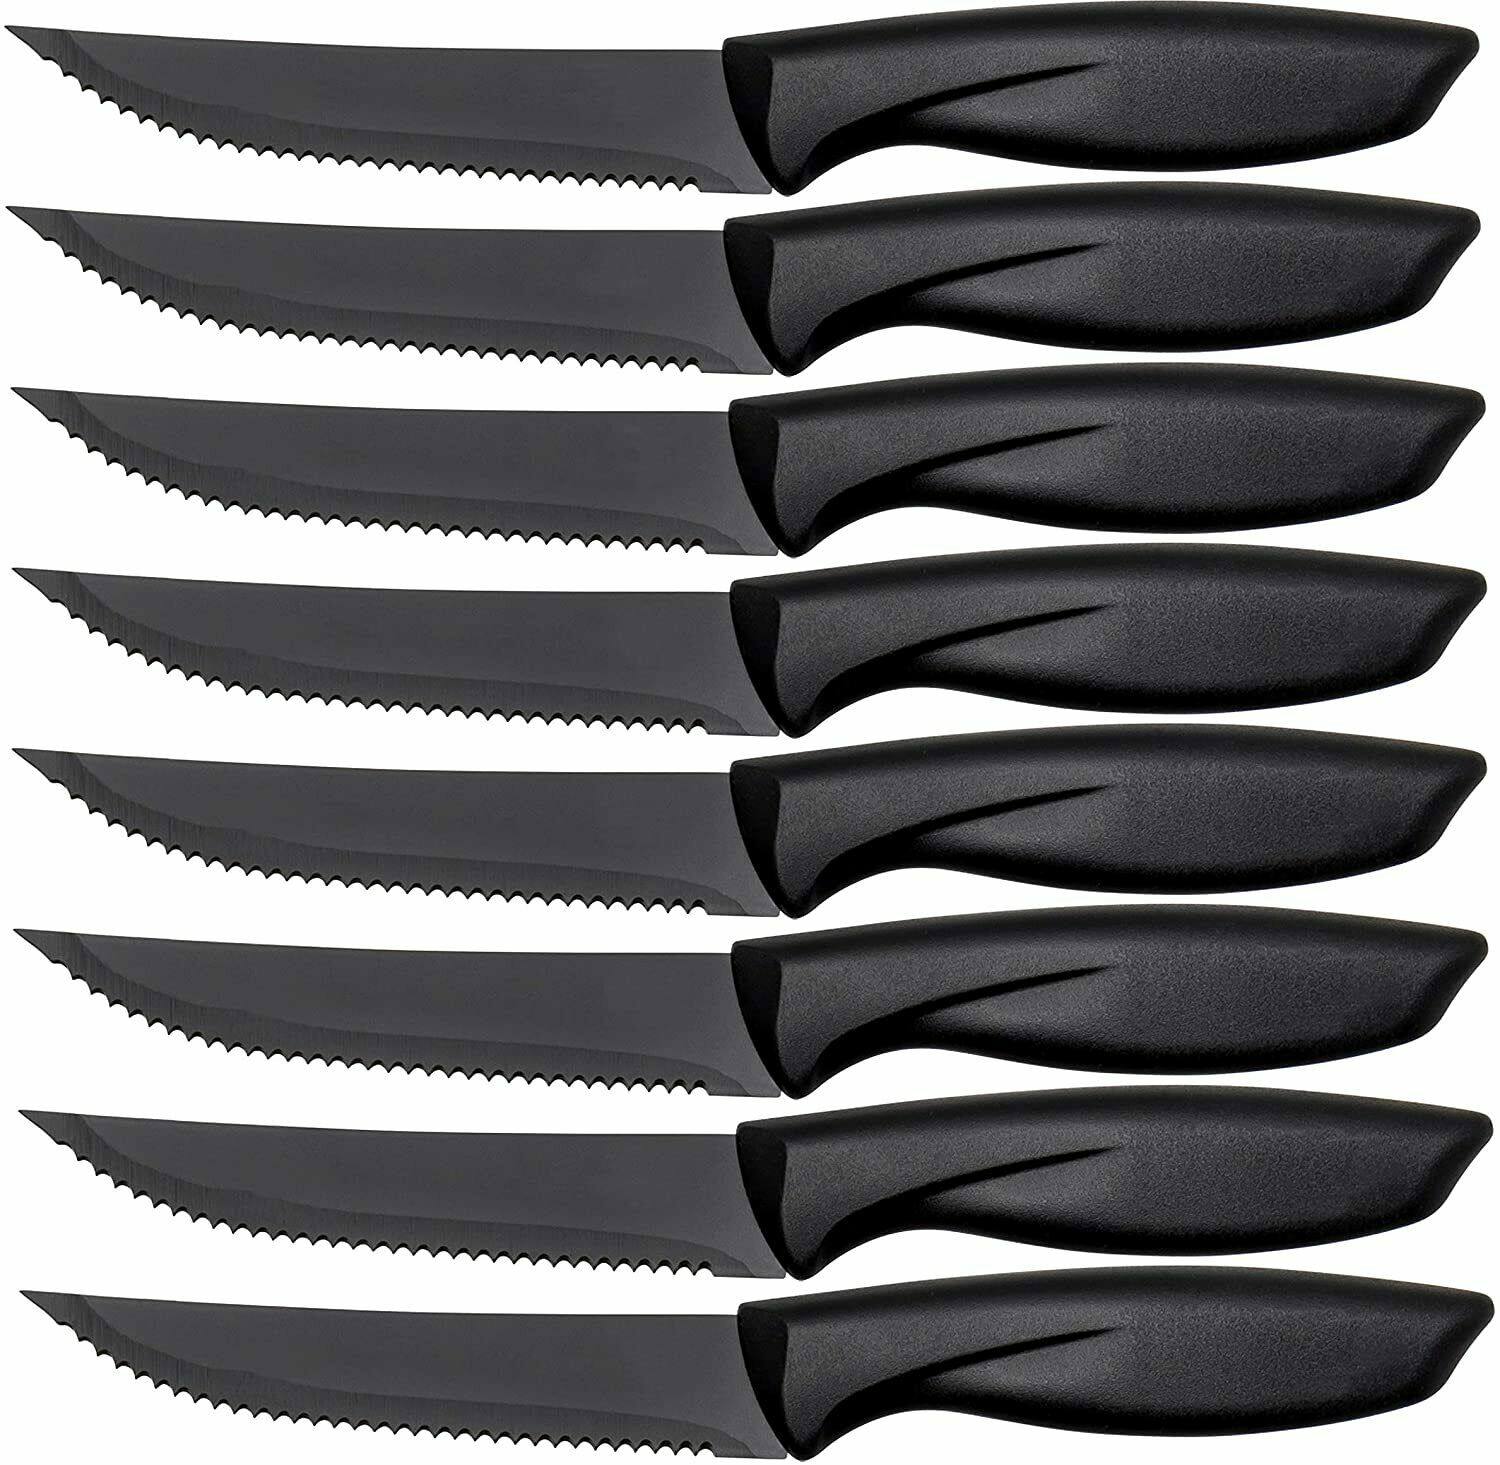 Kitchen Knife Set Steak Knives Sharp Stainless Steel Professional Chef  Cutlery